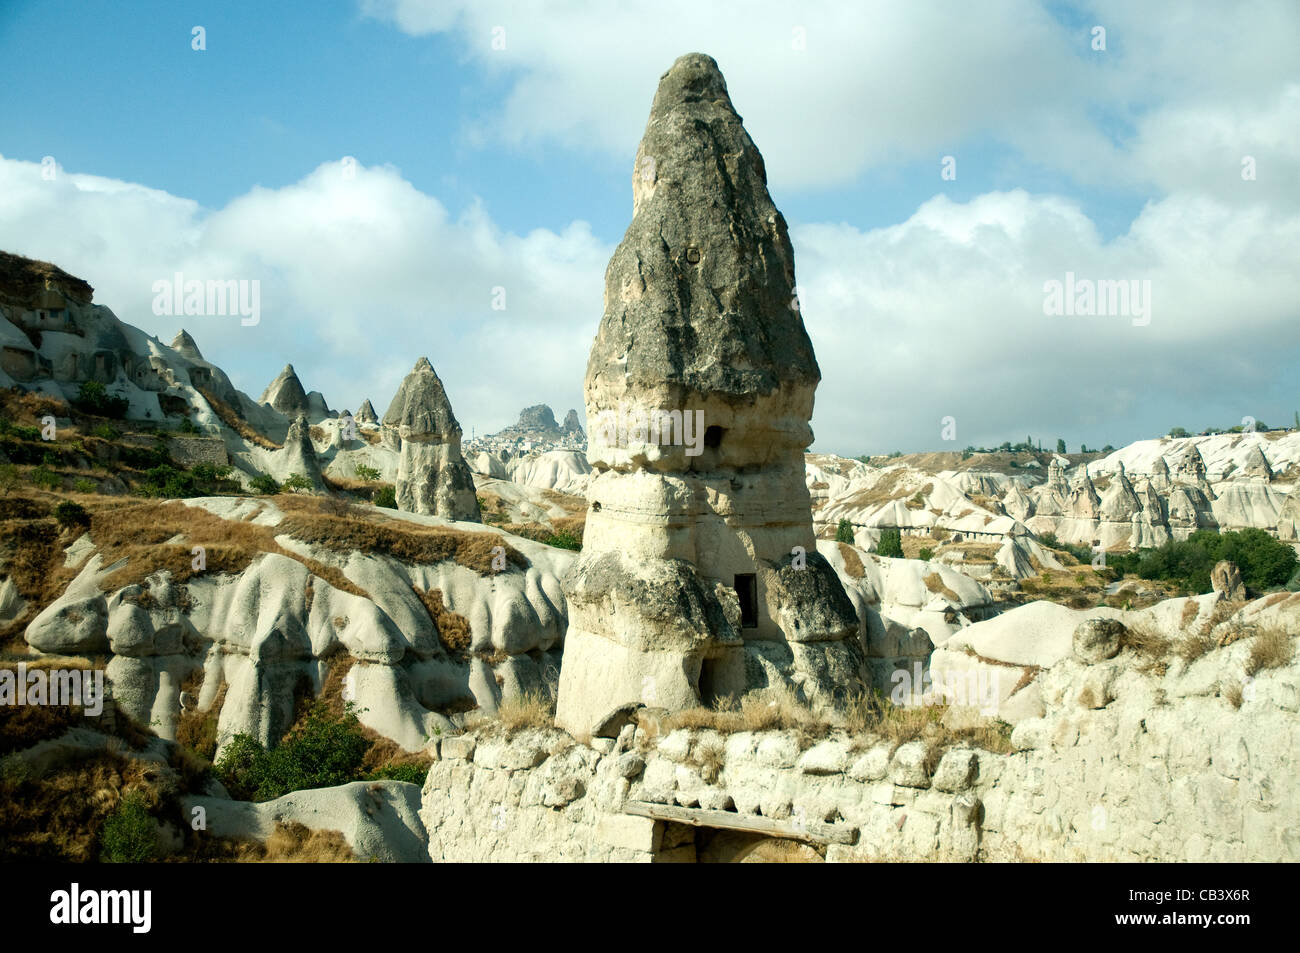 Tall conical rocks provide cave dwellings in Cappadocia's bizarre volcanically formed landscape Stock Photo